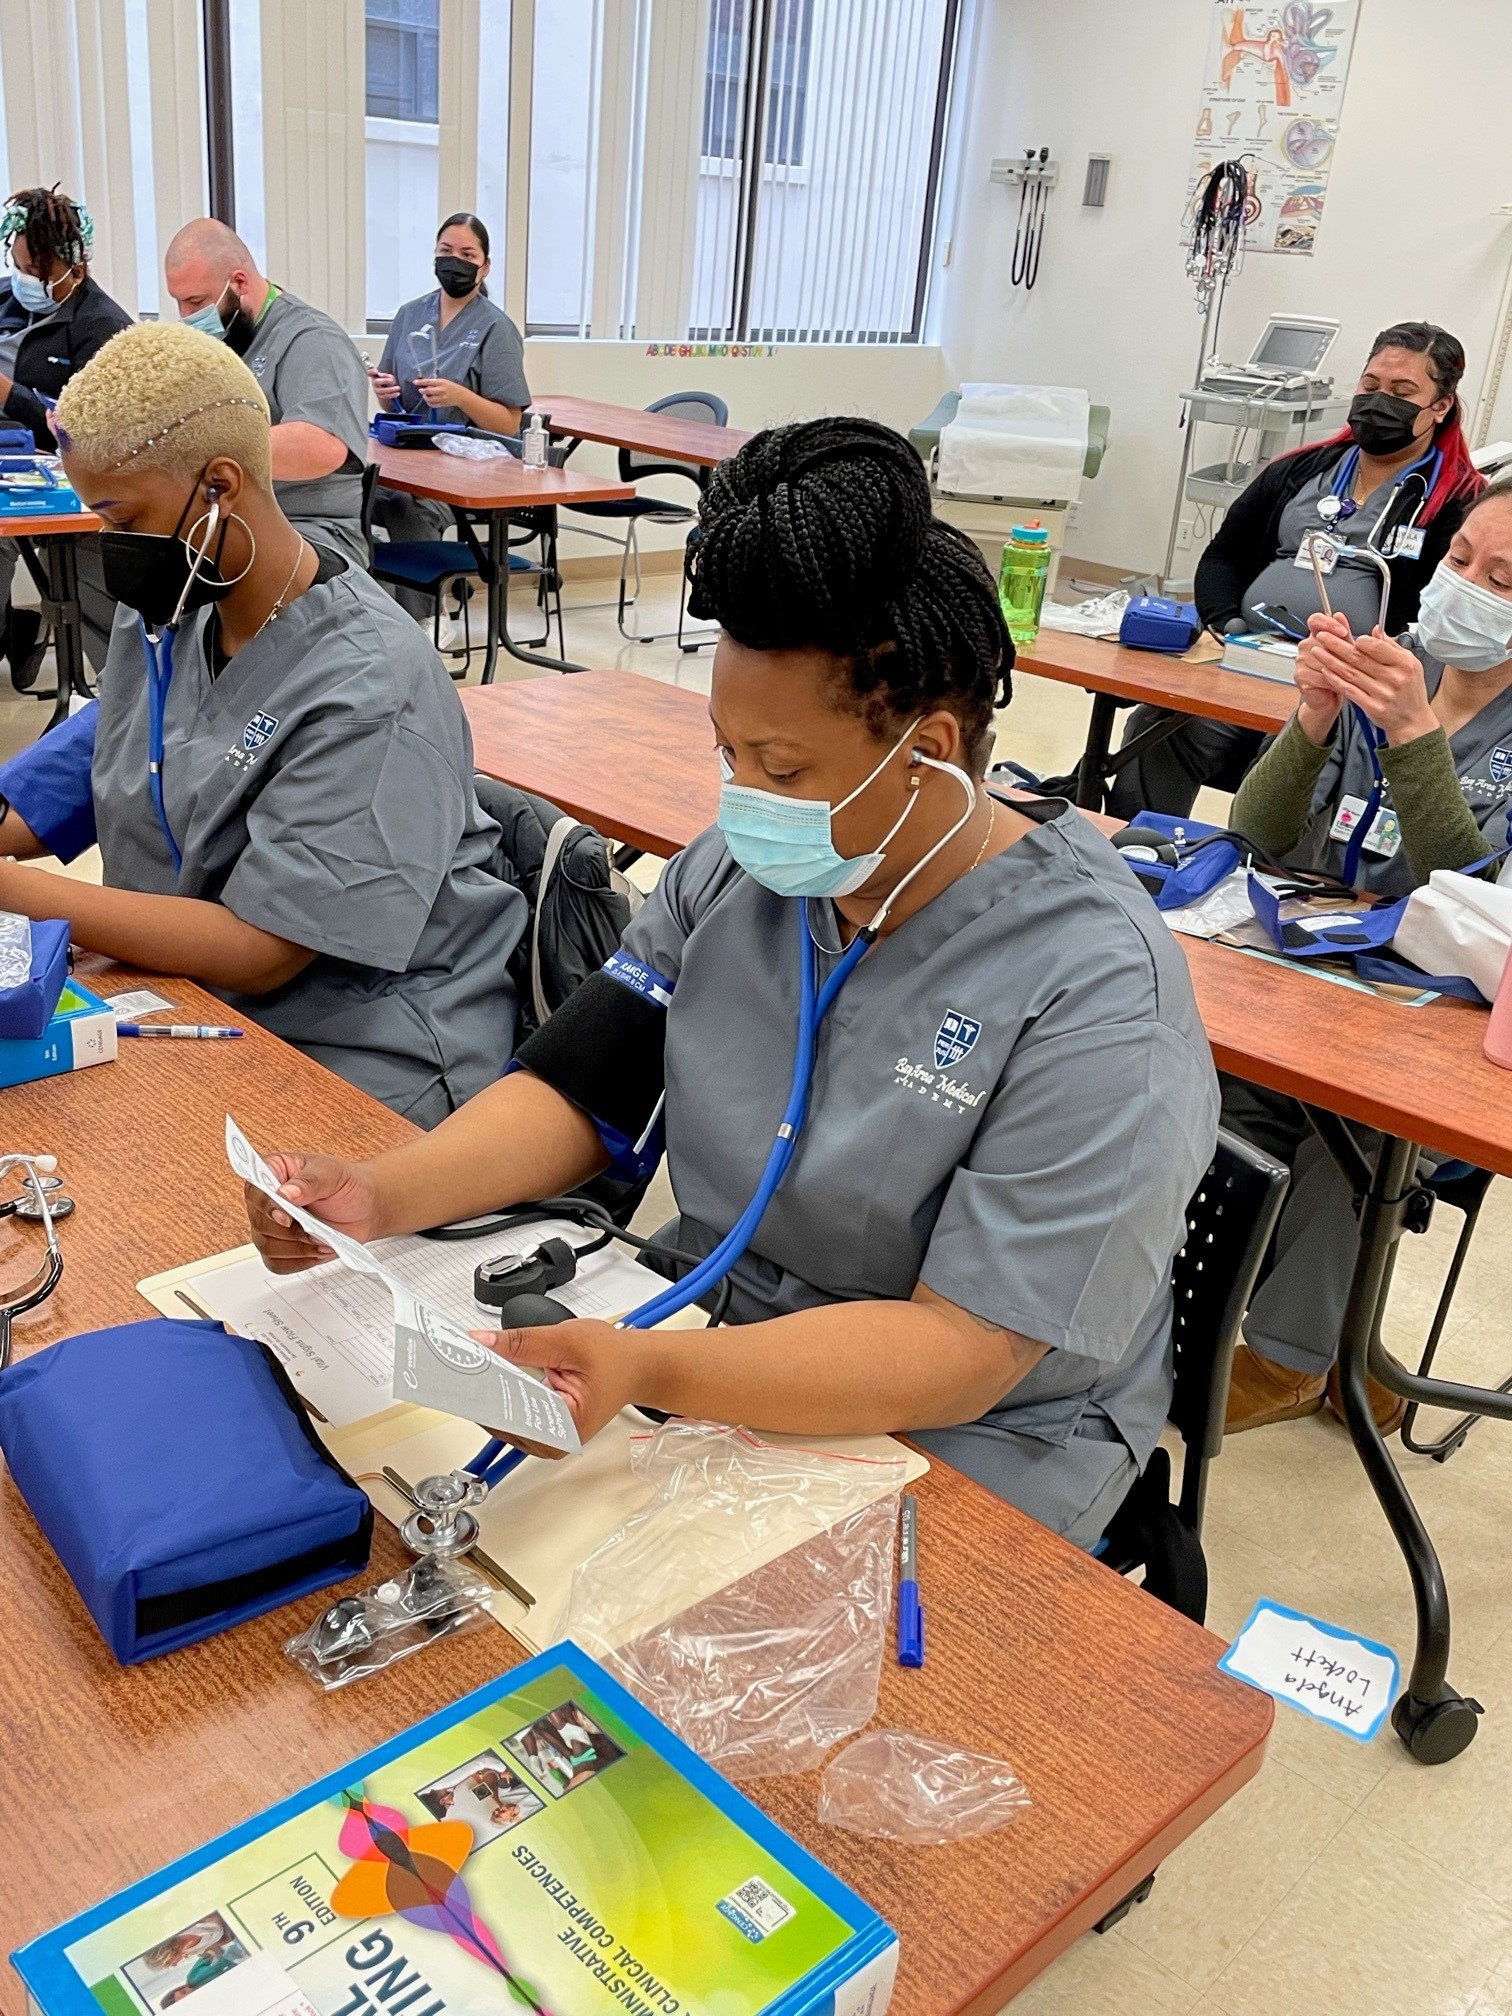 Adult students in classroom wear stethoscopes and masks learning about the healthcare field